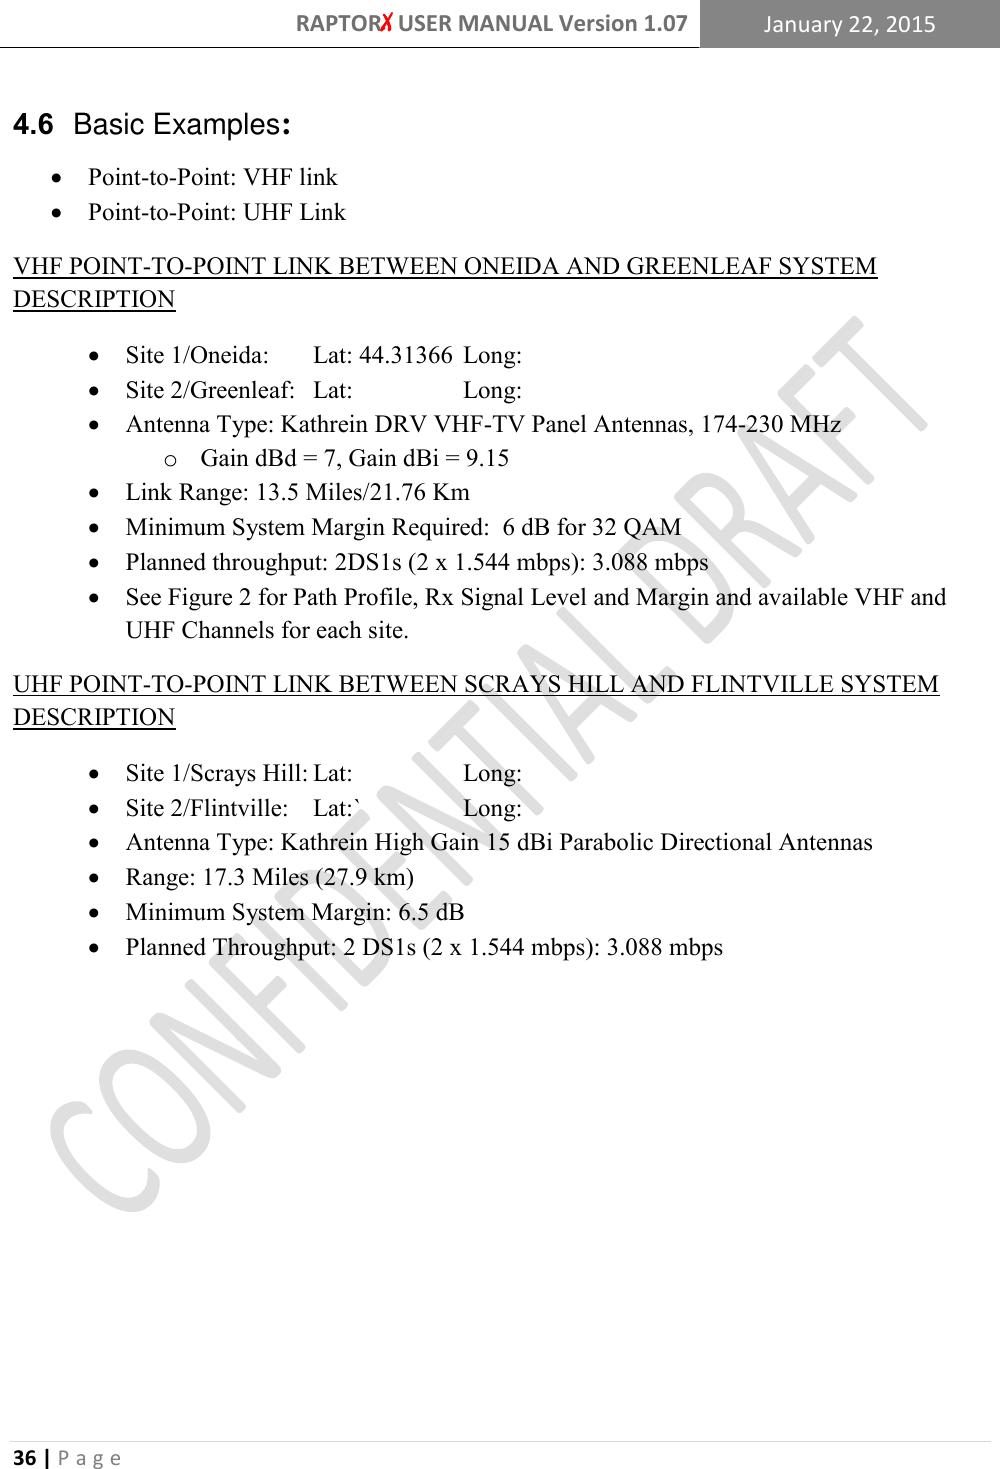 RAPTORX USER MANUAL Version 1.07 January 22, 2015  36 | P a g e   4.6  Basic Examples:  Point-to-Point: VHF link  Point-to-Point: UHF Link VHF POINT-TO-POINT LINK BETWEEN ONEIDA AND GREENLEAF SYSTEM DESCRIPTION  Site 1/Oneida:   Lat: 44.31366  Long:   Site 2/Greenleaf:   Lat:    Long:  Antenna Type: Kathrein DRV VHF-TV Panel Antennas, 174-230 MHz  o Gain dBd = 7, Gain dBi = 9.15  Link Range: 13.5 Miles/21.76 Km  Minimum System Margin Required:  6 dB for 32 QAM  Planned throughput: 2DS1s (2 x 1.544 mbps): 3.088 mbps  See Figure 2 for Path Profile, Rx Signal Level and Margin and available VHF and UHF Channels for each site. UHF POINT-TO-POINT LINK BETWEEN SCRAYS HILL AND FLINTVILLE SYSTEM DESCRIPTION  Site 1/Scrays Hill: Lat:    Long:  Site 2/Flintville:  Lat:`    Long:  Antenna Type: Kathrein High Gain 15 dBi Parabolic Directional Antennas  Range: 17.3 Miles (27.9 km)  Minimum System Margin: 6.5 dB  Planned Throughput: 2 DS1s (2 x 1.544 mbps): 3.088 mbps         